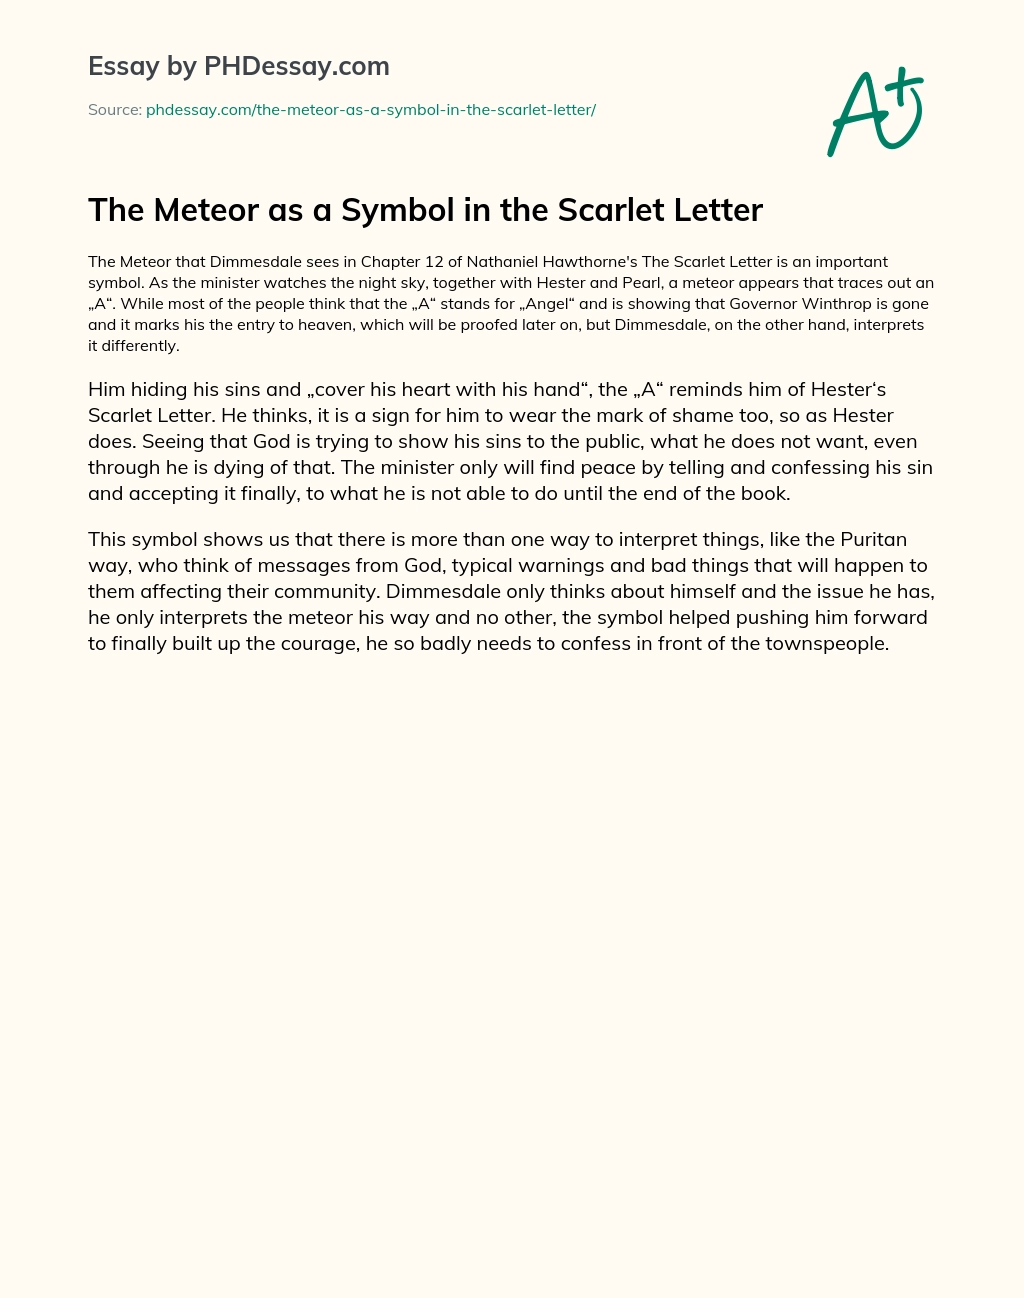 The Meteor as a Symbol in the Scarlet Letter essay